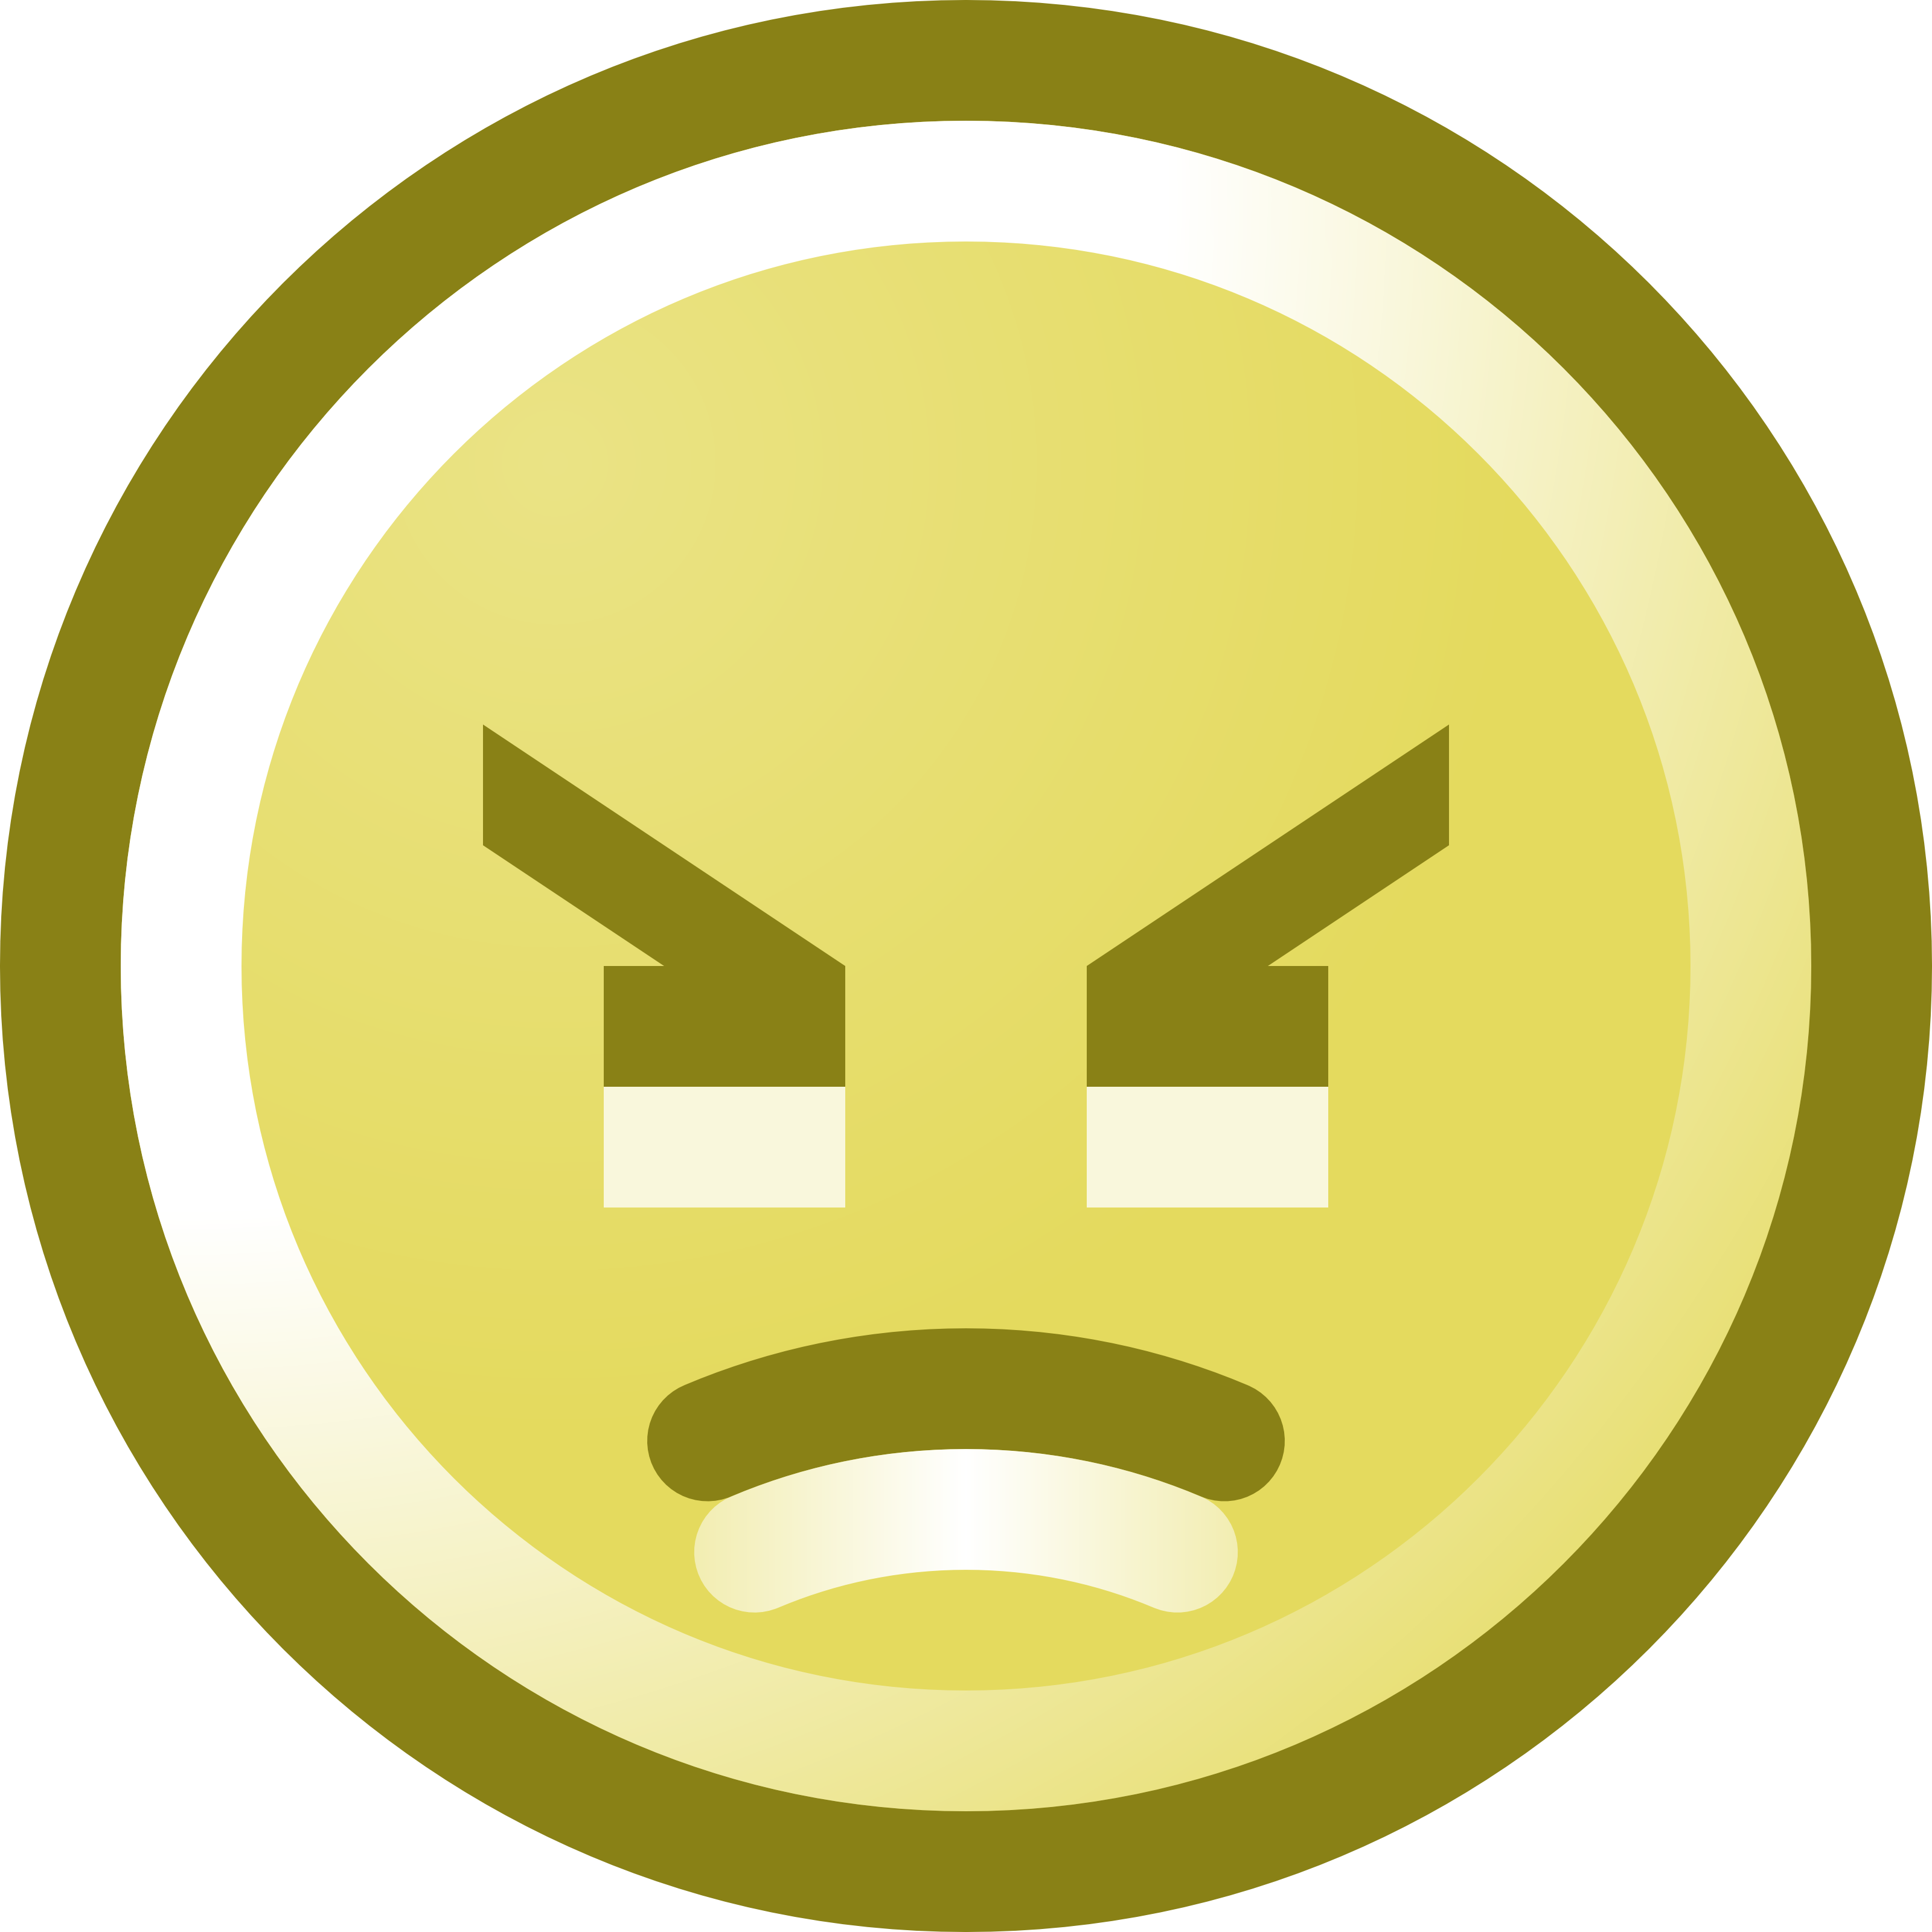 Anger at getdrawings com. Mad clipart indignation